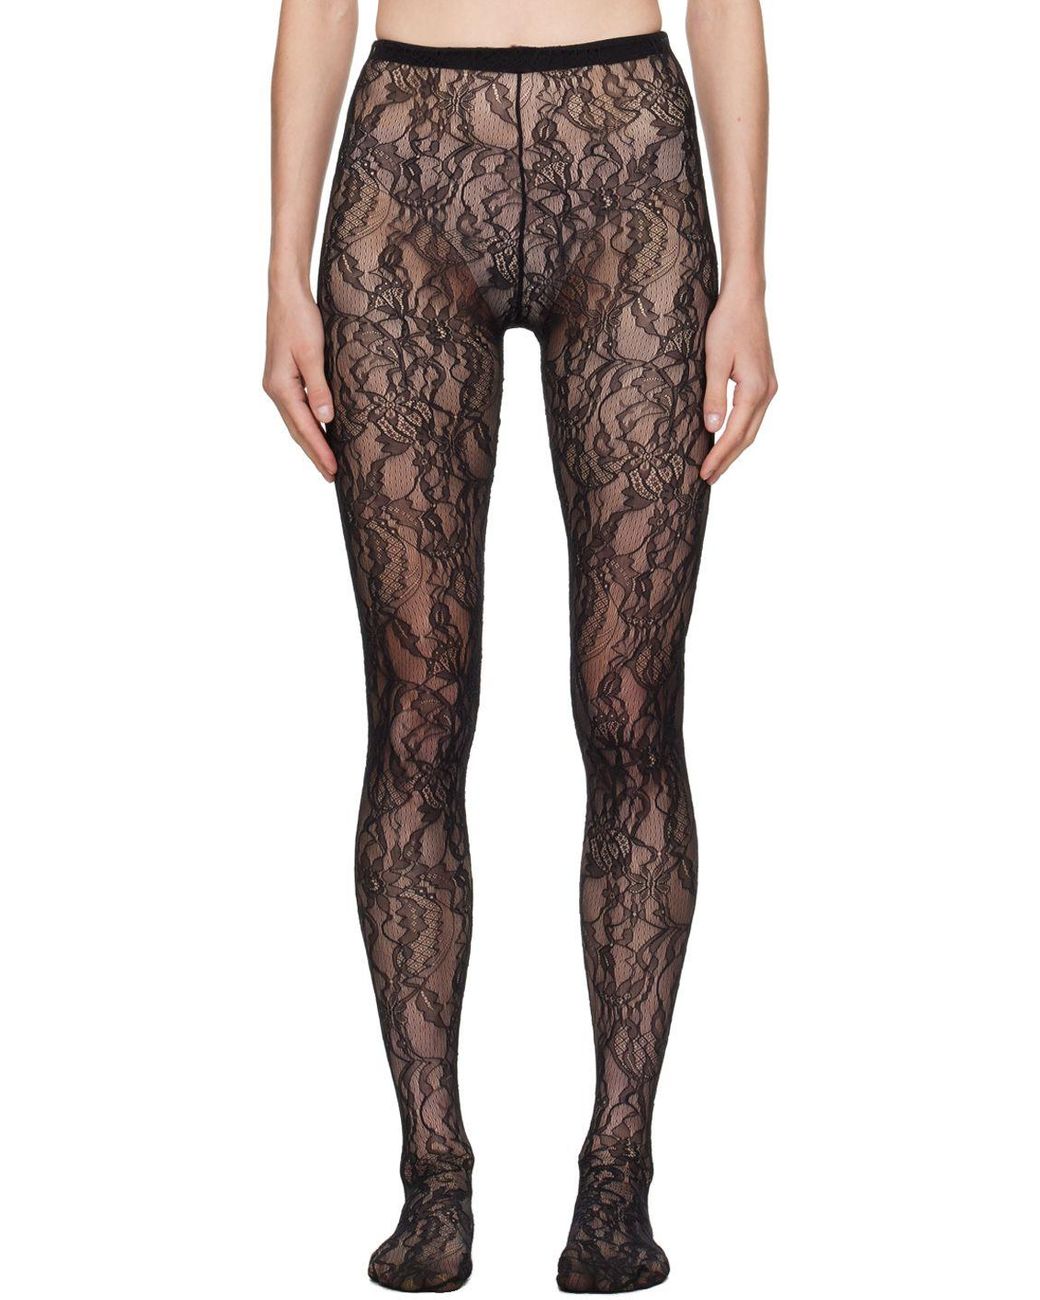 Floral lace tights in black - Wardrobe NYC